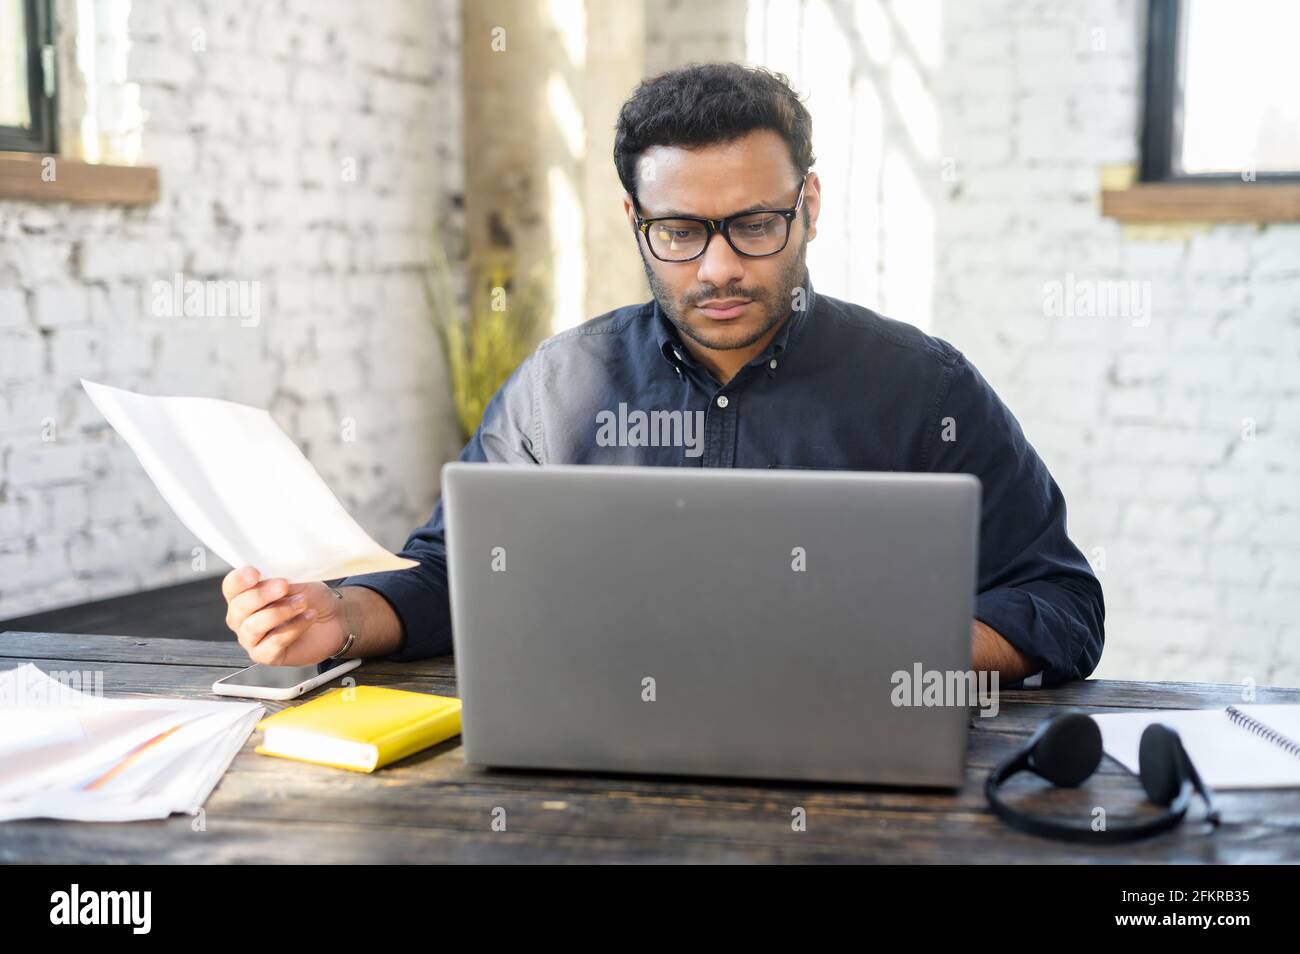 https://c8.alamy.com/comp/2FKRB35/executive-mixed-race-male-office-employee-doing-paperwork-sitting-at-the-desk-with-laptop-in-office-focused-and-serious-hindu-man-in-smart-casual-looking-through-sheets-of-documents-preparing-report-2FKRB35.jpg